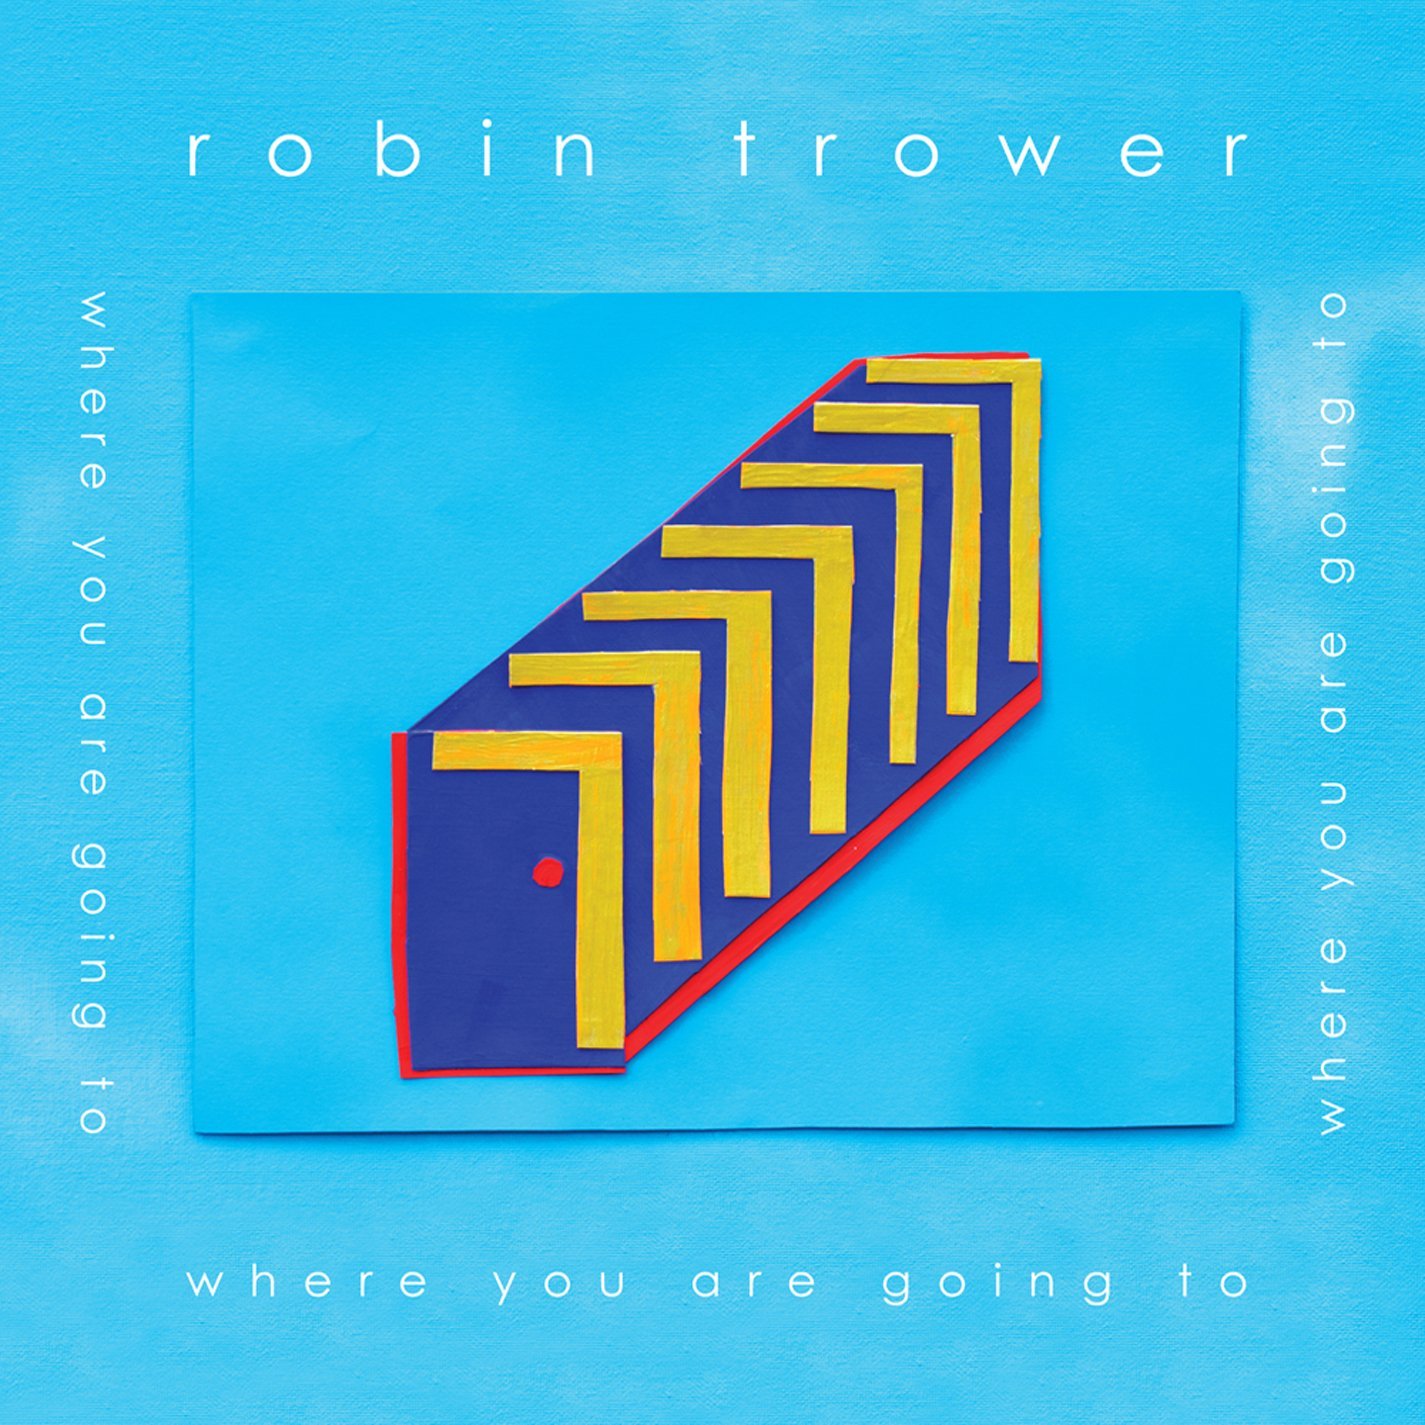 Robin Trower – Where Are You Going To is the Latest from the Legendary Guitarist!